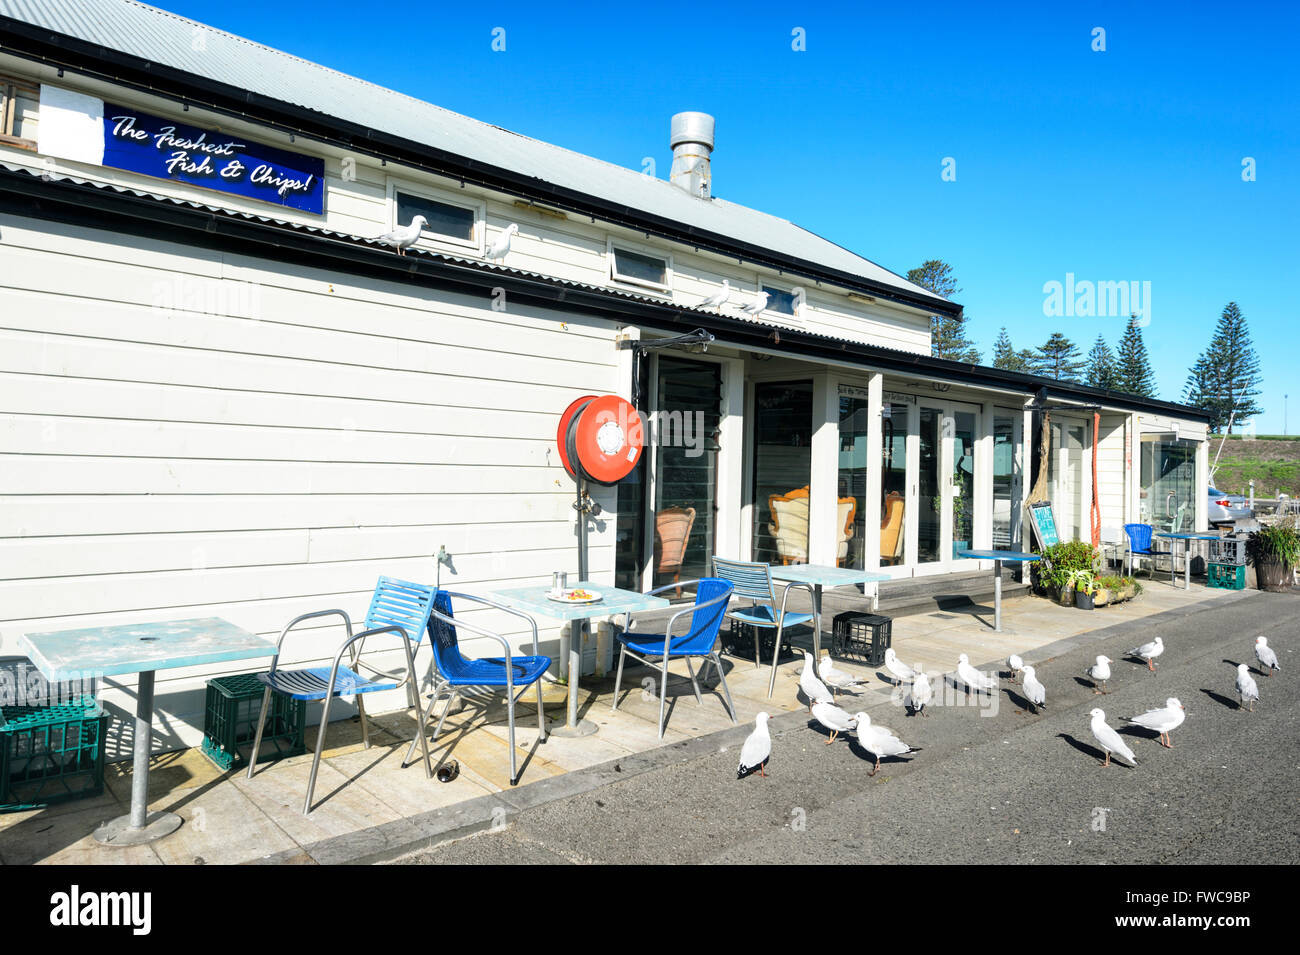 Seagulls about to scavenge leftovers outside a Fish and Chips Shop, Kiama, Illawarra Coast, New South Wales, Australia Stock Photo